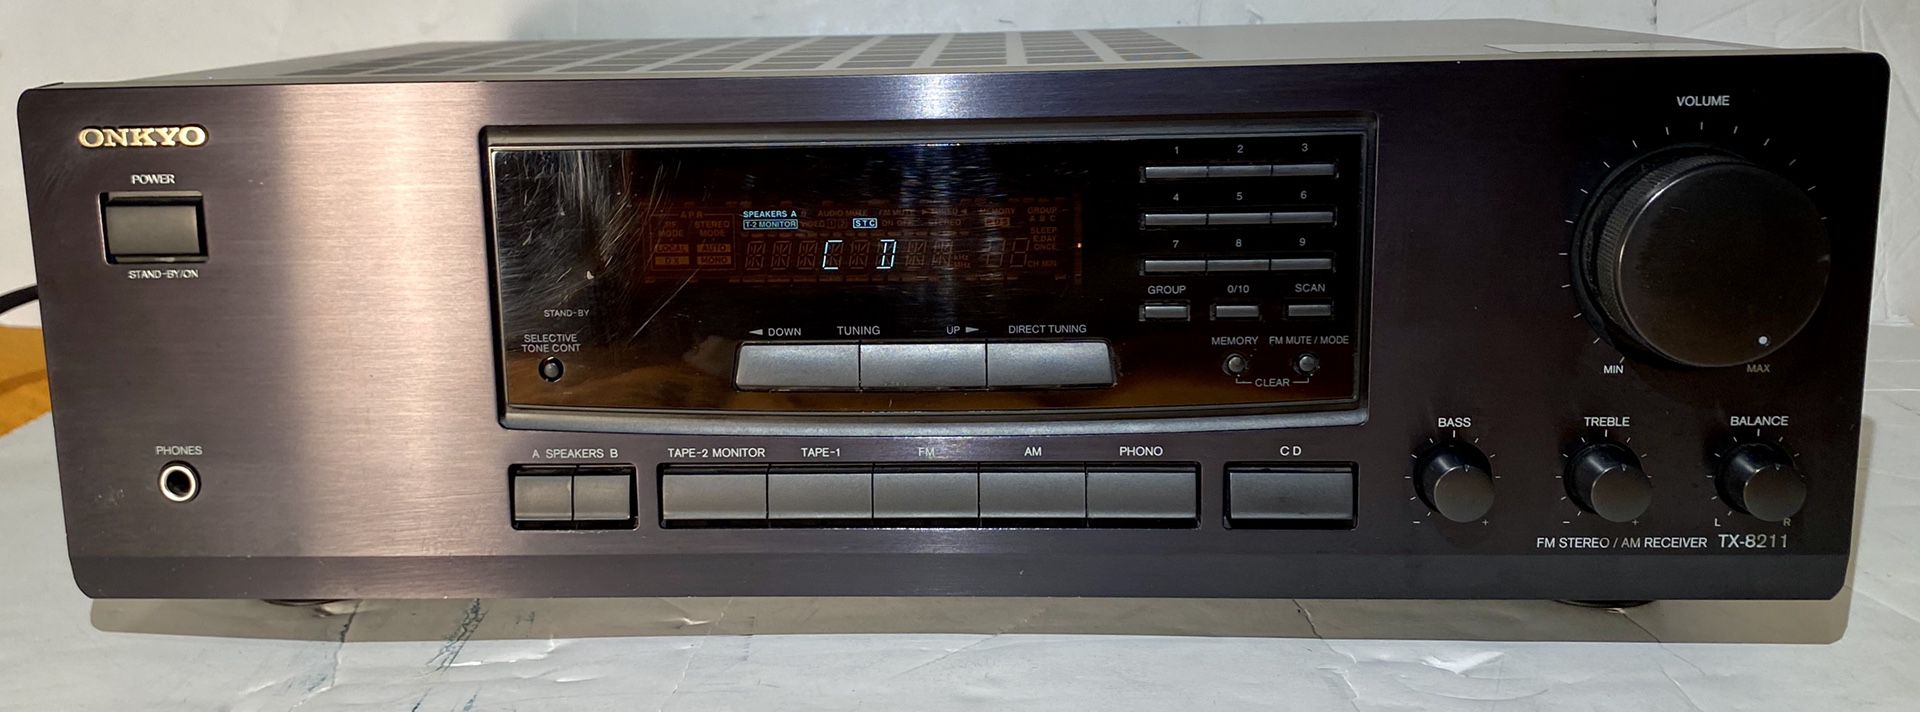 Onkyo TX-8211 Receiver Amplifier AM/FM Stereo Home Theater